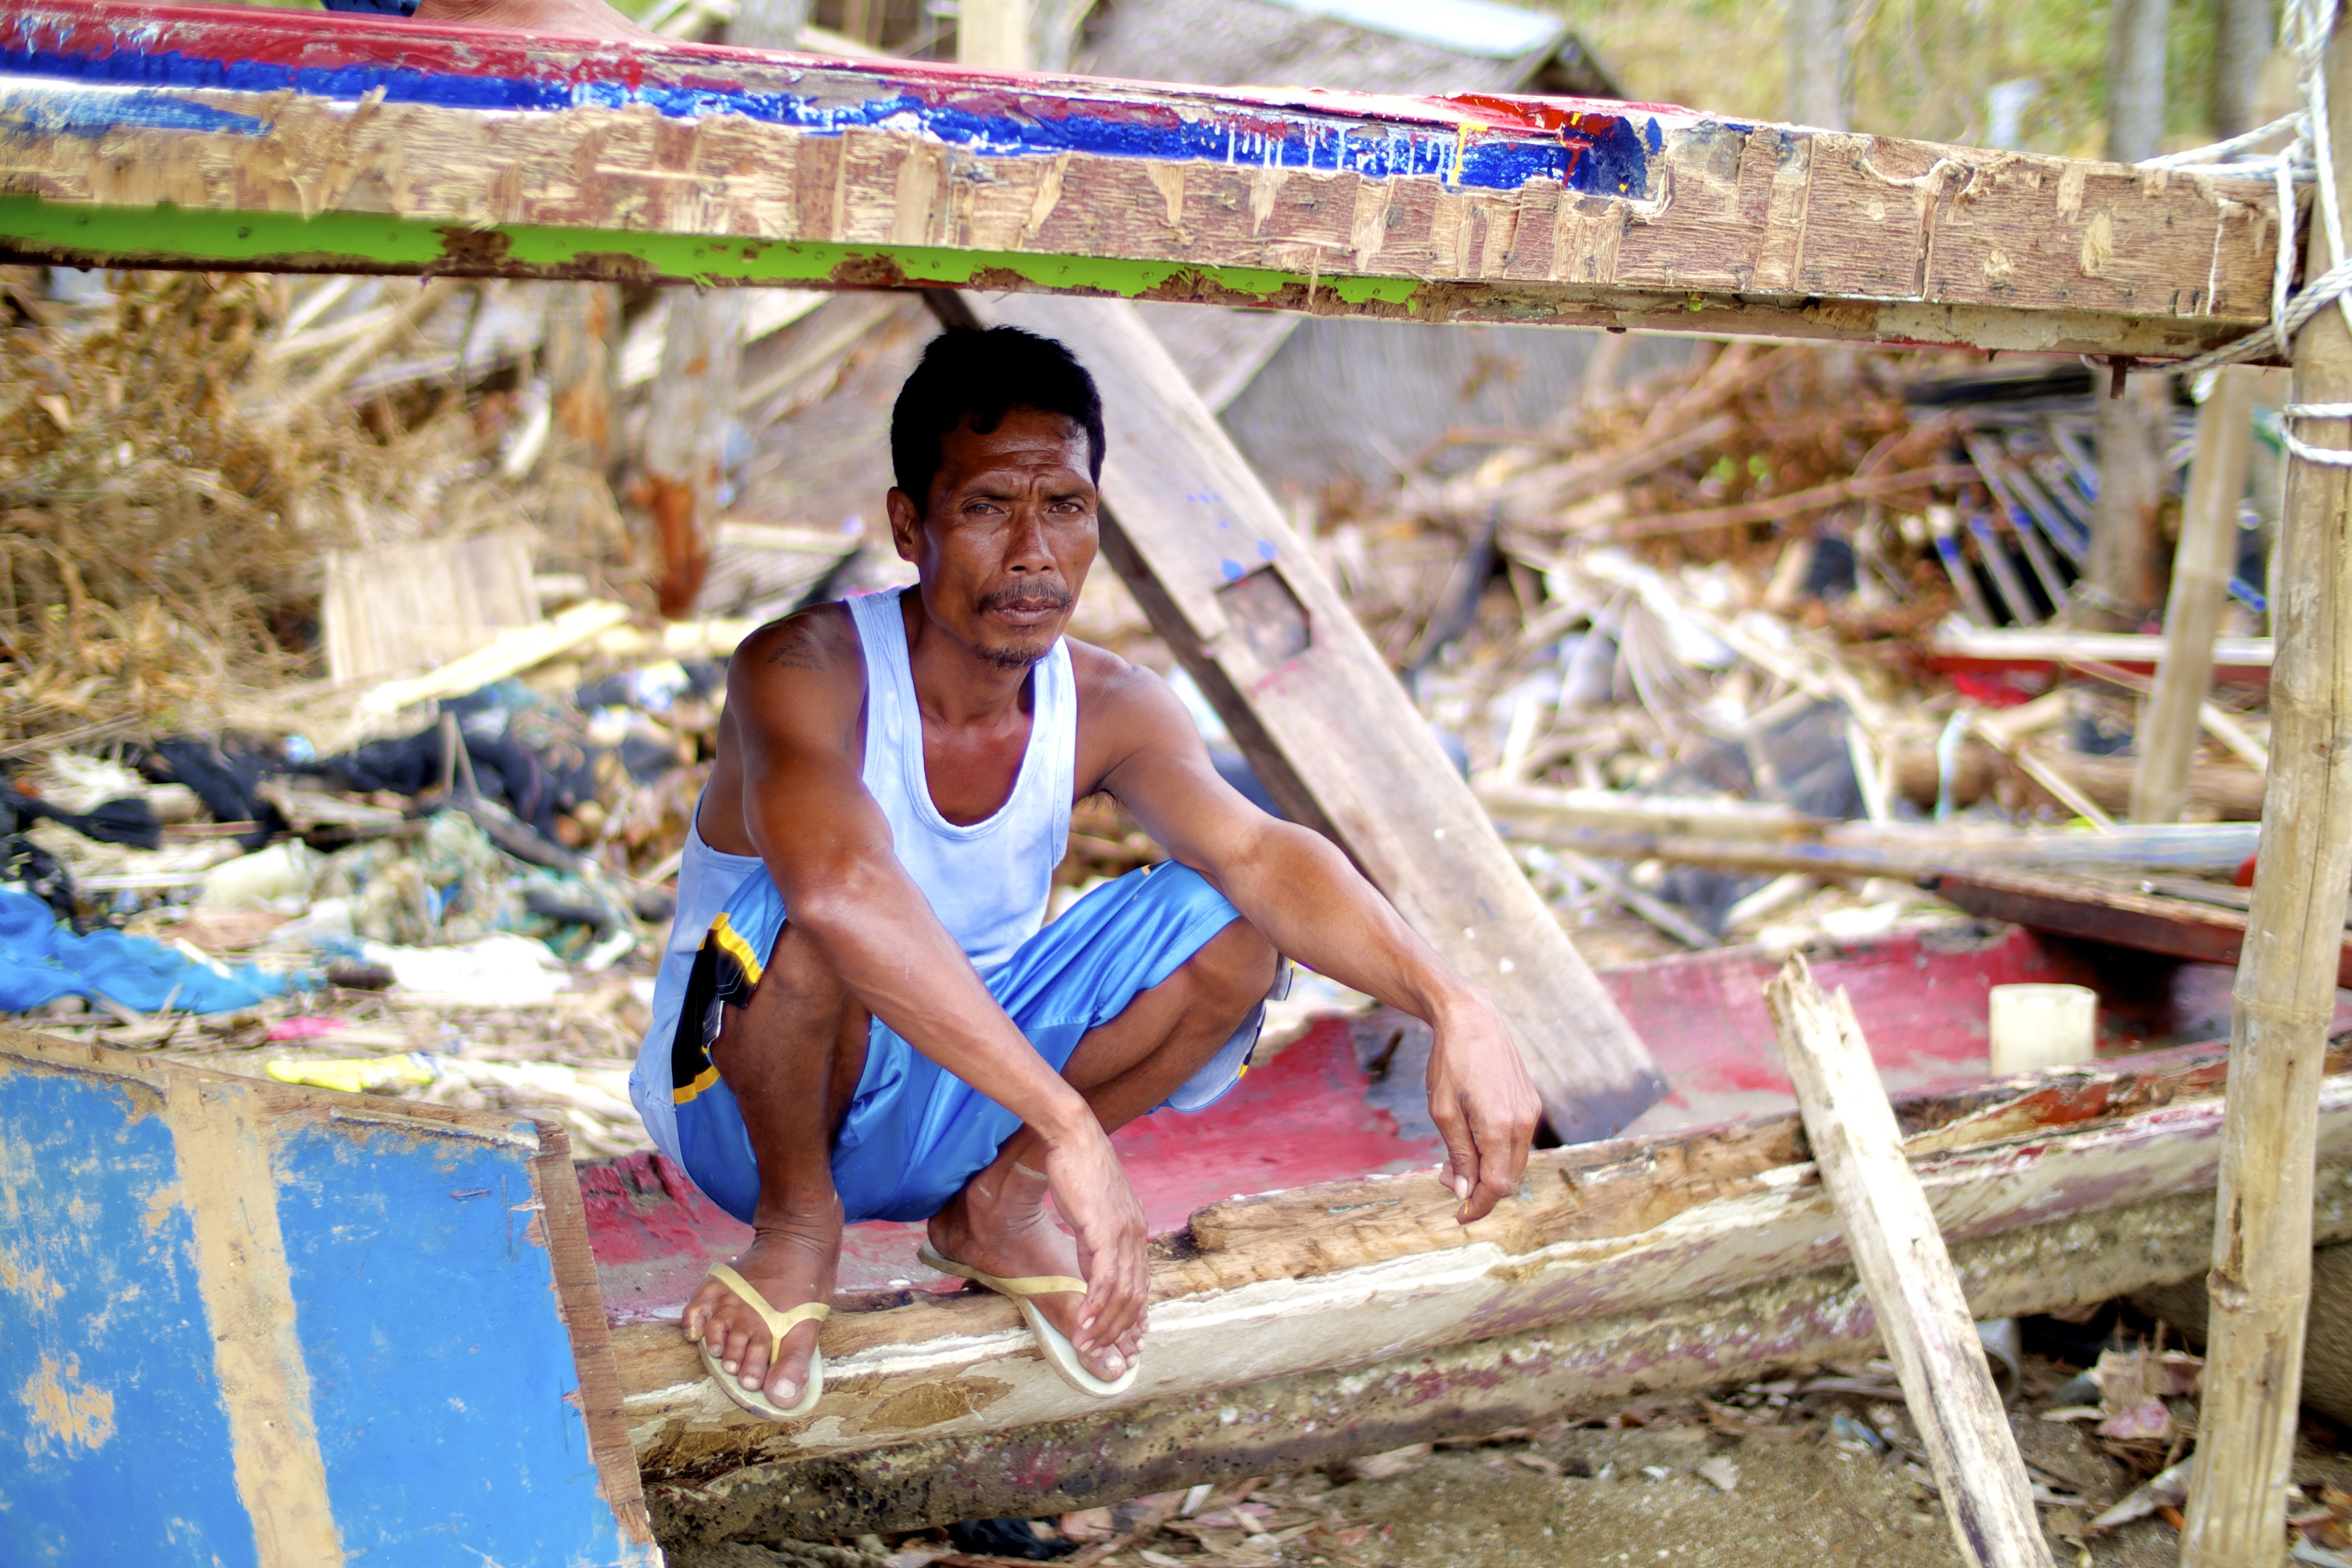 Fishing captain sits in the wreckage of the boat he and his crew relied upon for their livelihoods, damaged during Typhoon Haiyan